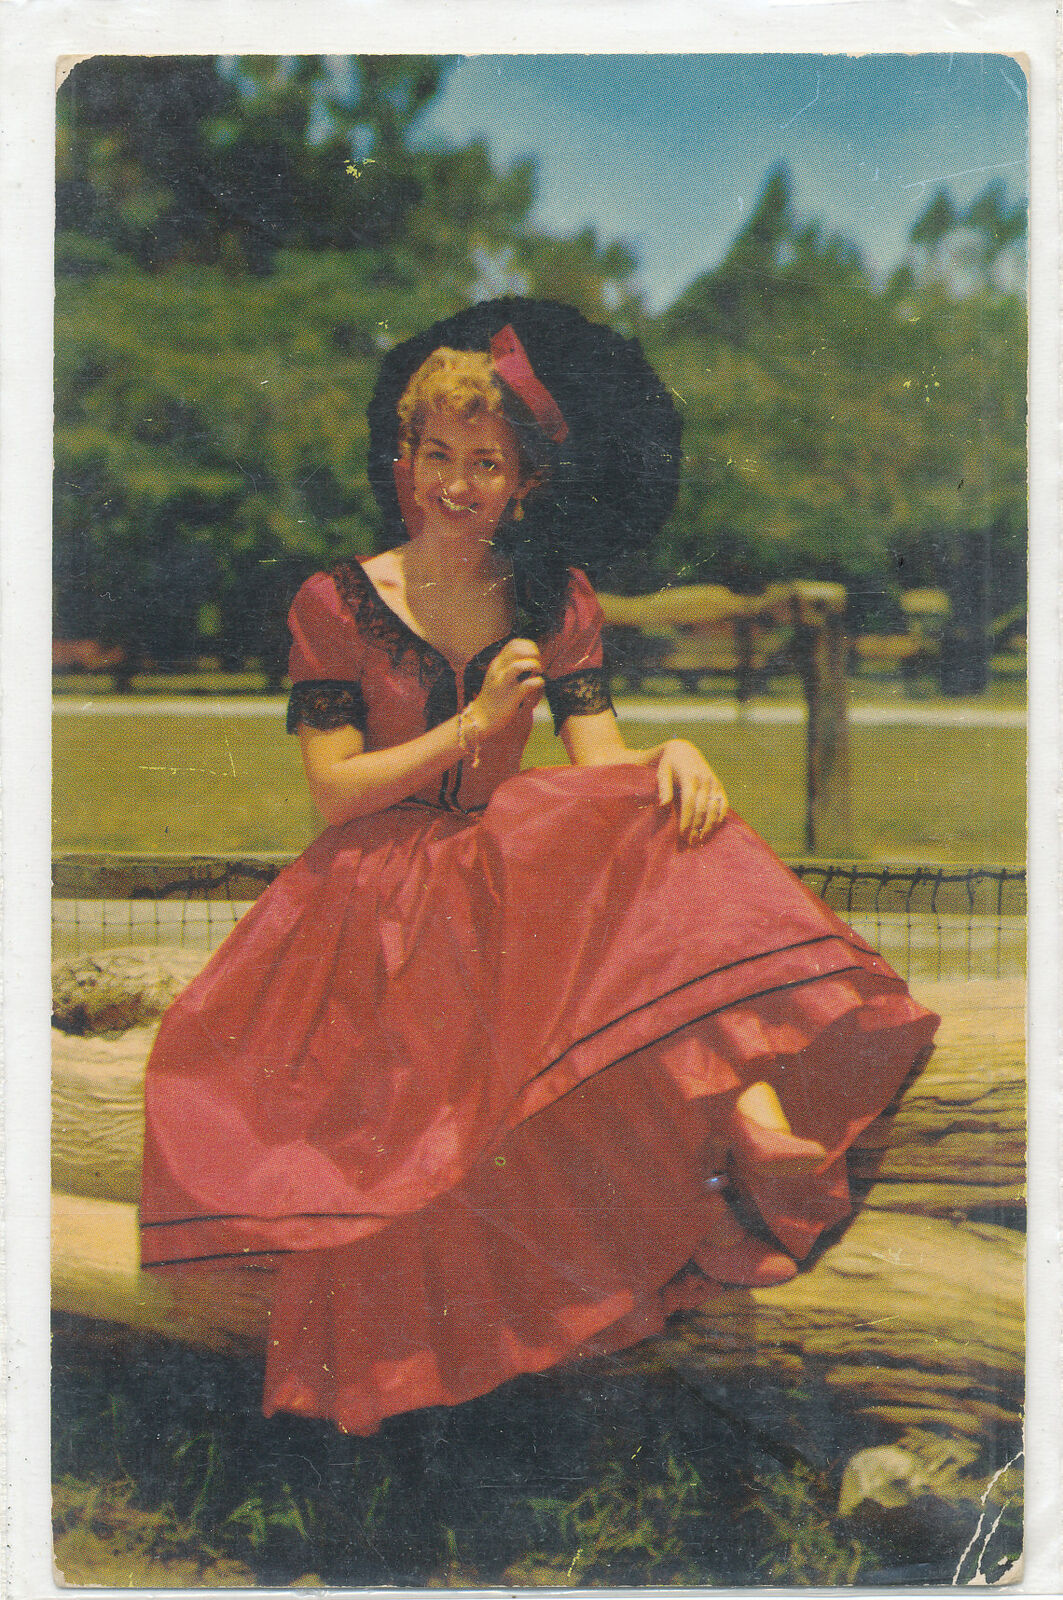 Pretty Southern Belle Glenna - WOMAN WITH PARASOL - chrome postcard unused